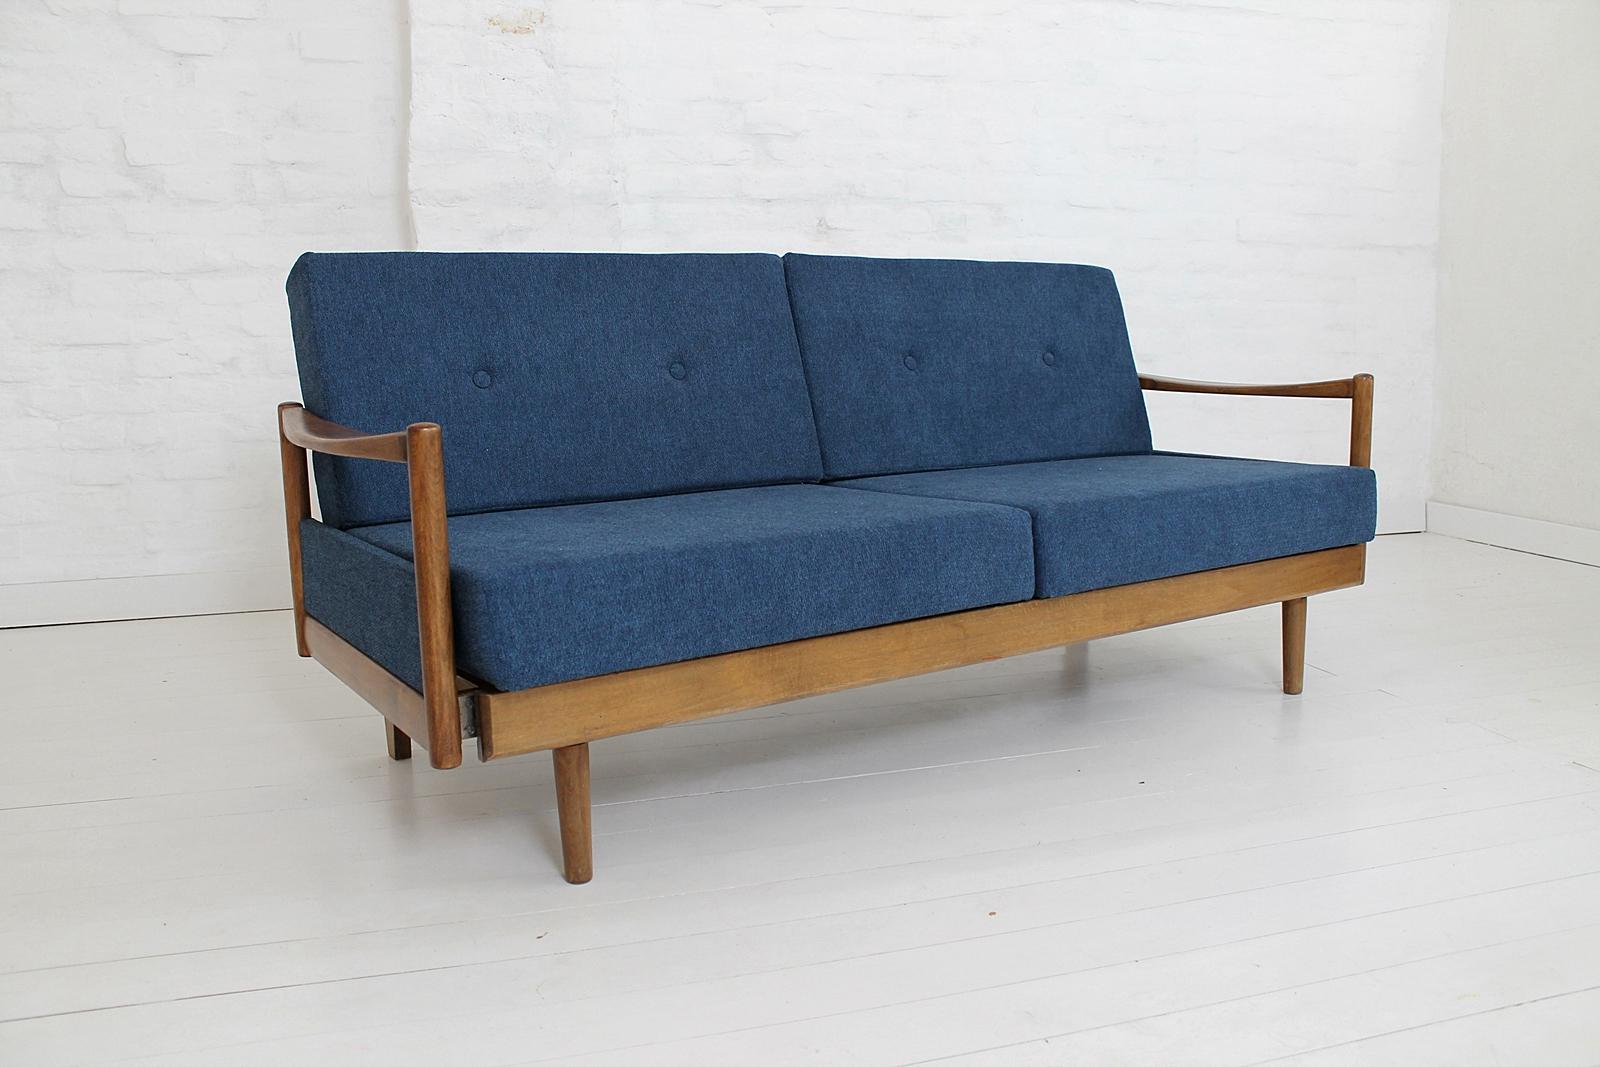 Rare magic / Stella sofa by Wilhelm Knoll for Knoll Antimott, 1950s
The daybed has a beech frame and is extendable in both sides and easily convertible from a sofa to a daybed with a turning construction.
Can be extended to about 212 cm
The pillows